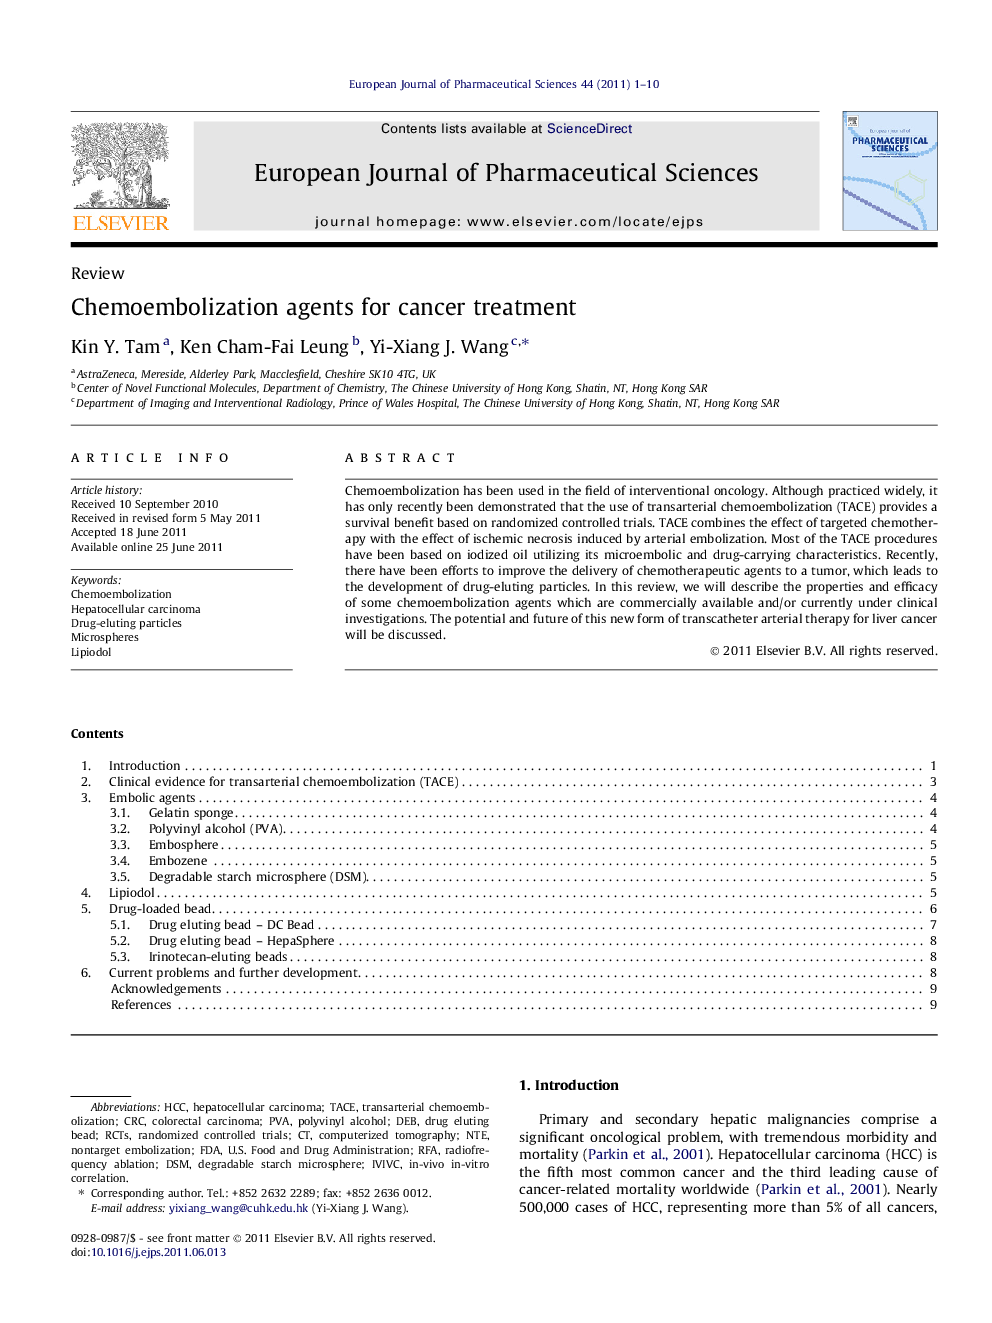 Chemoembolization agents for cancer treatment